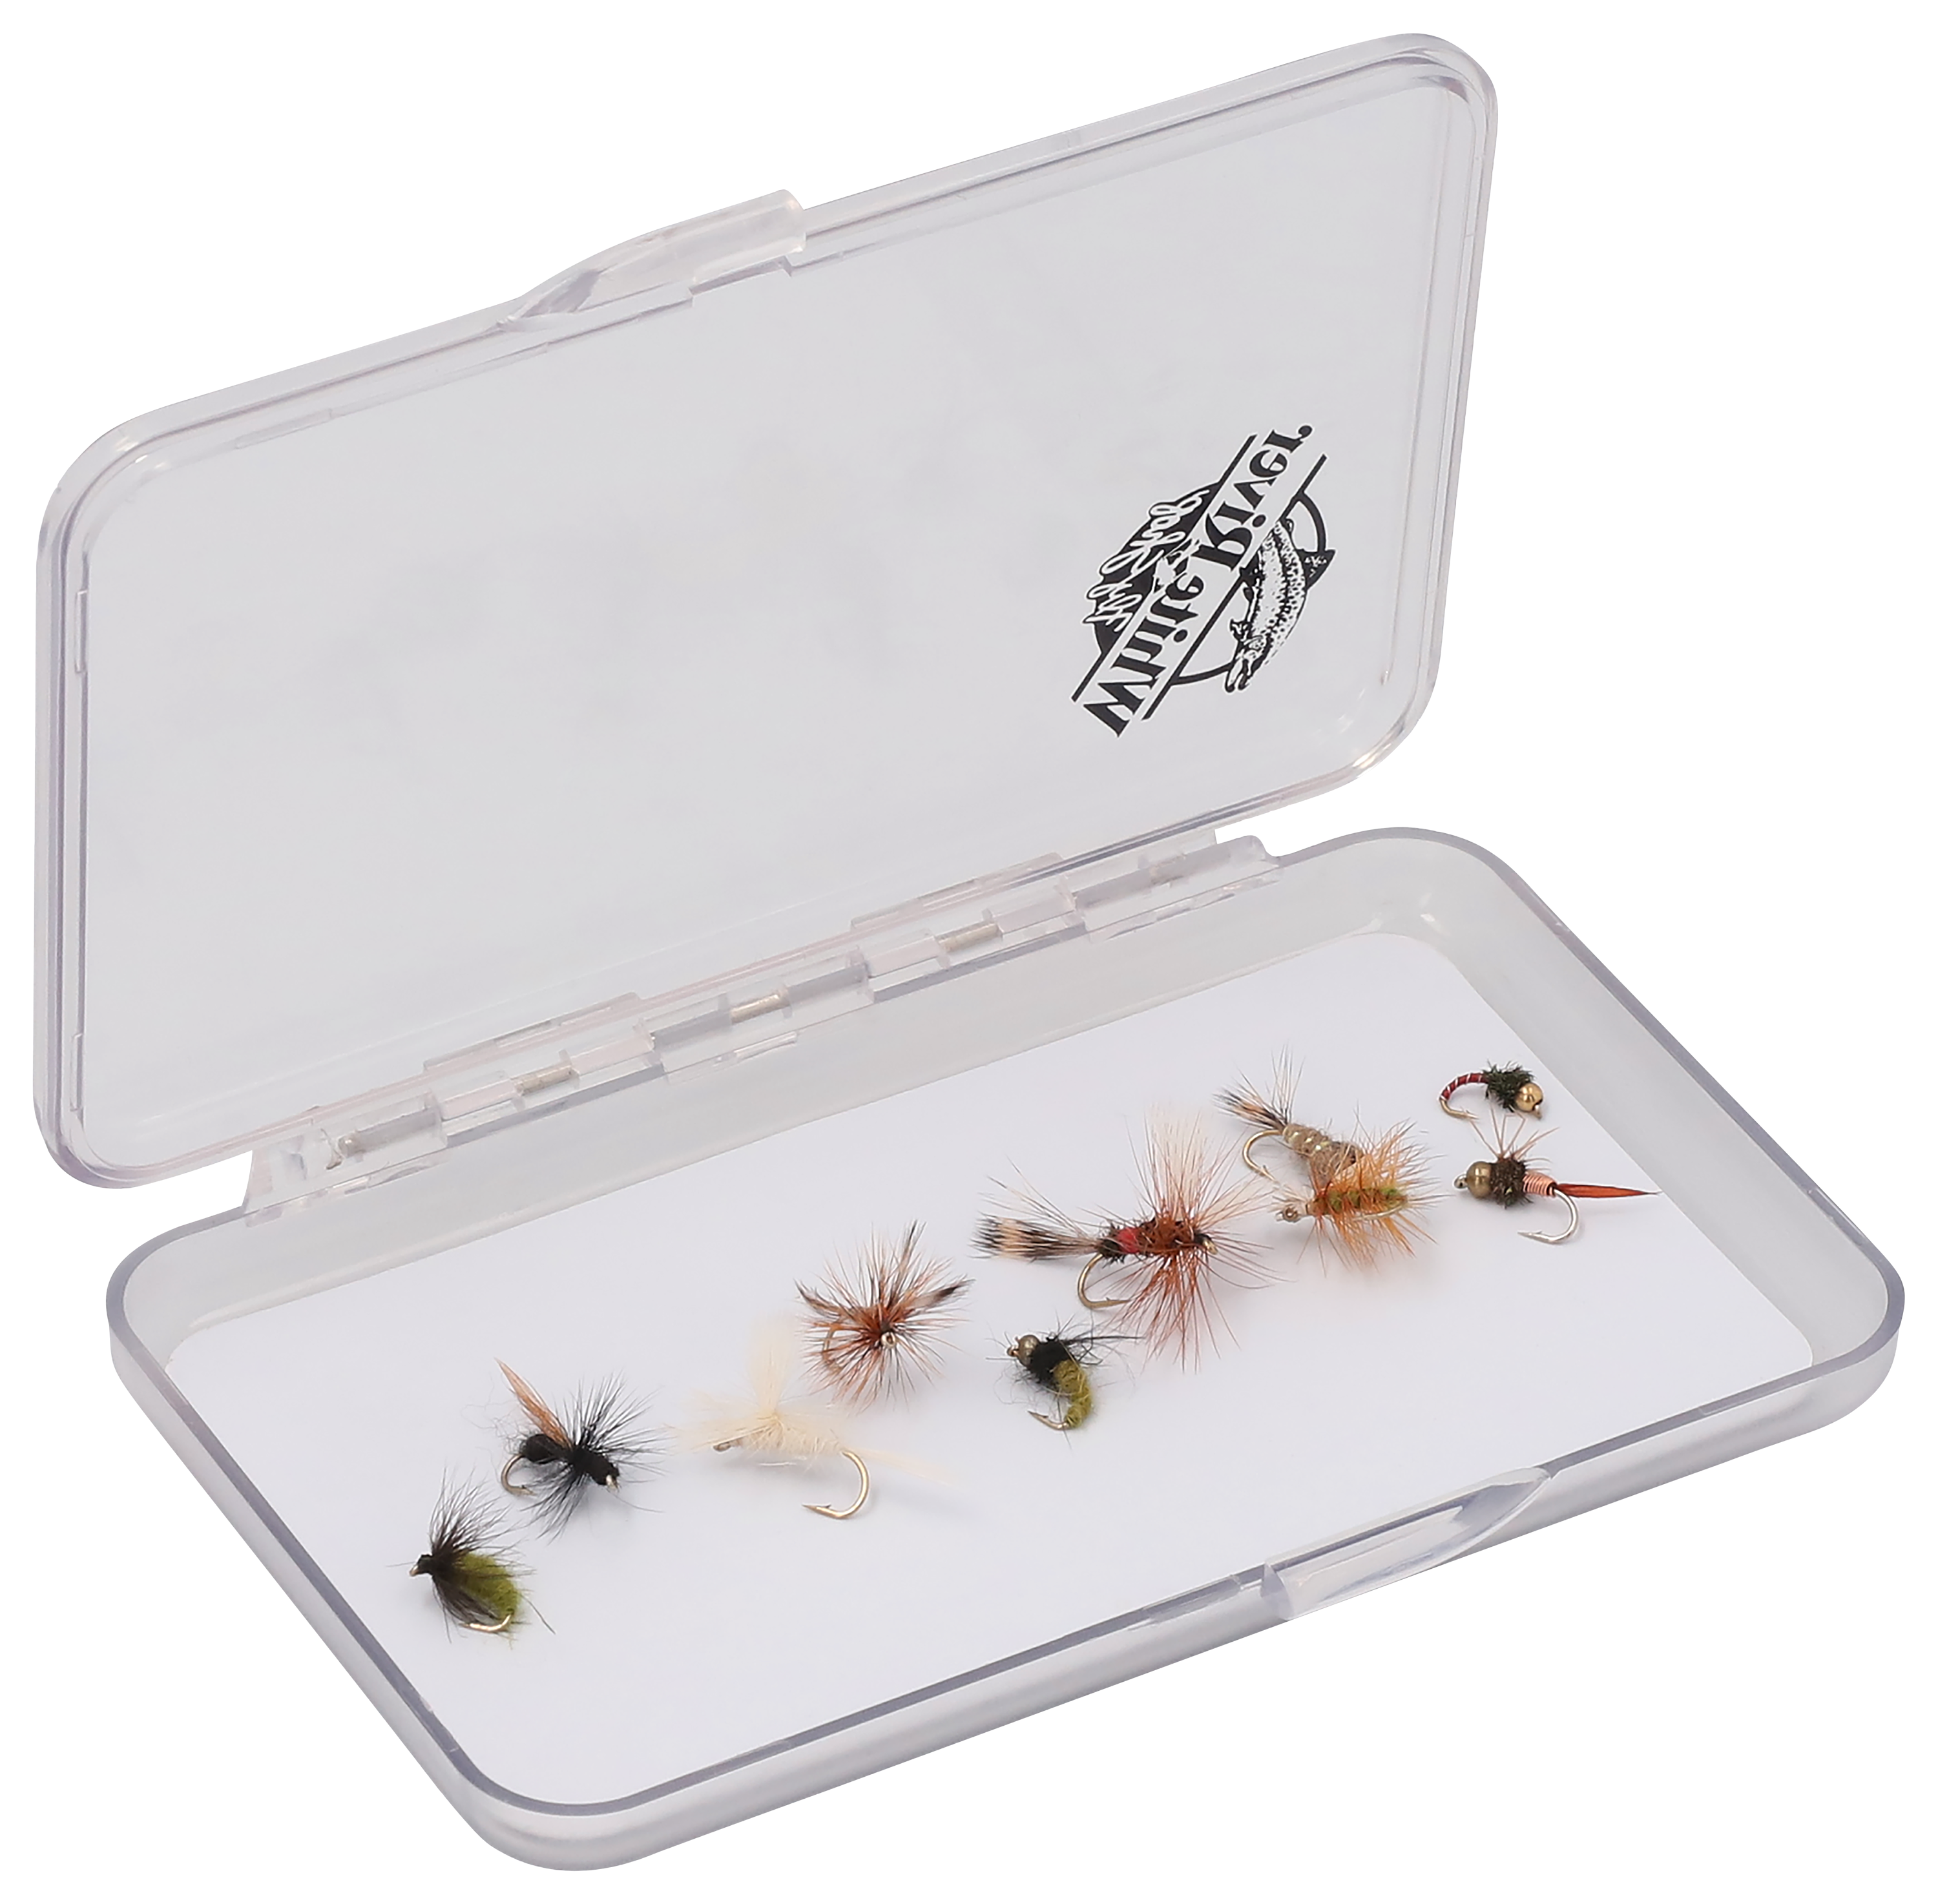 White River Fly Shop Riseform Magnetic Bottom Fly Box - 5 x 3-1/2 x 1/2 - Magnetic